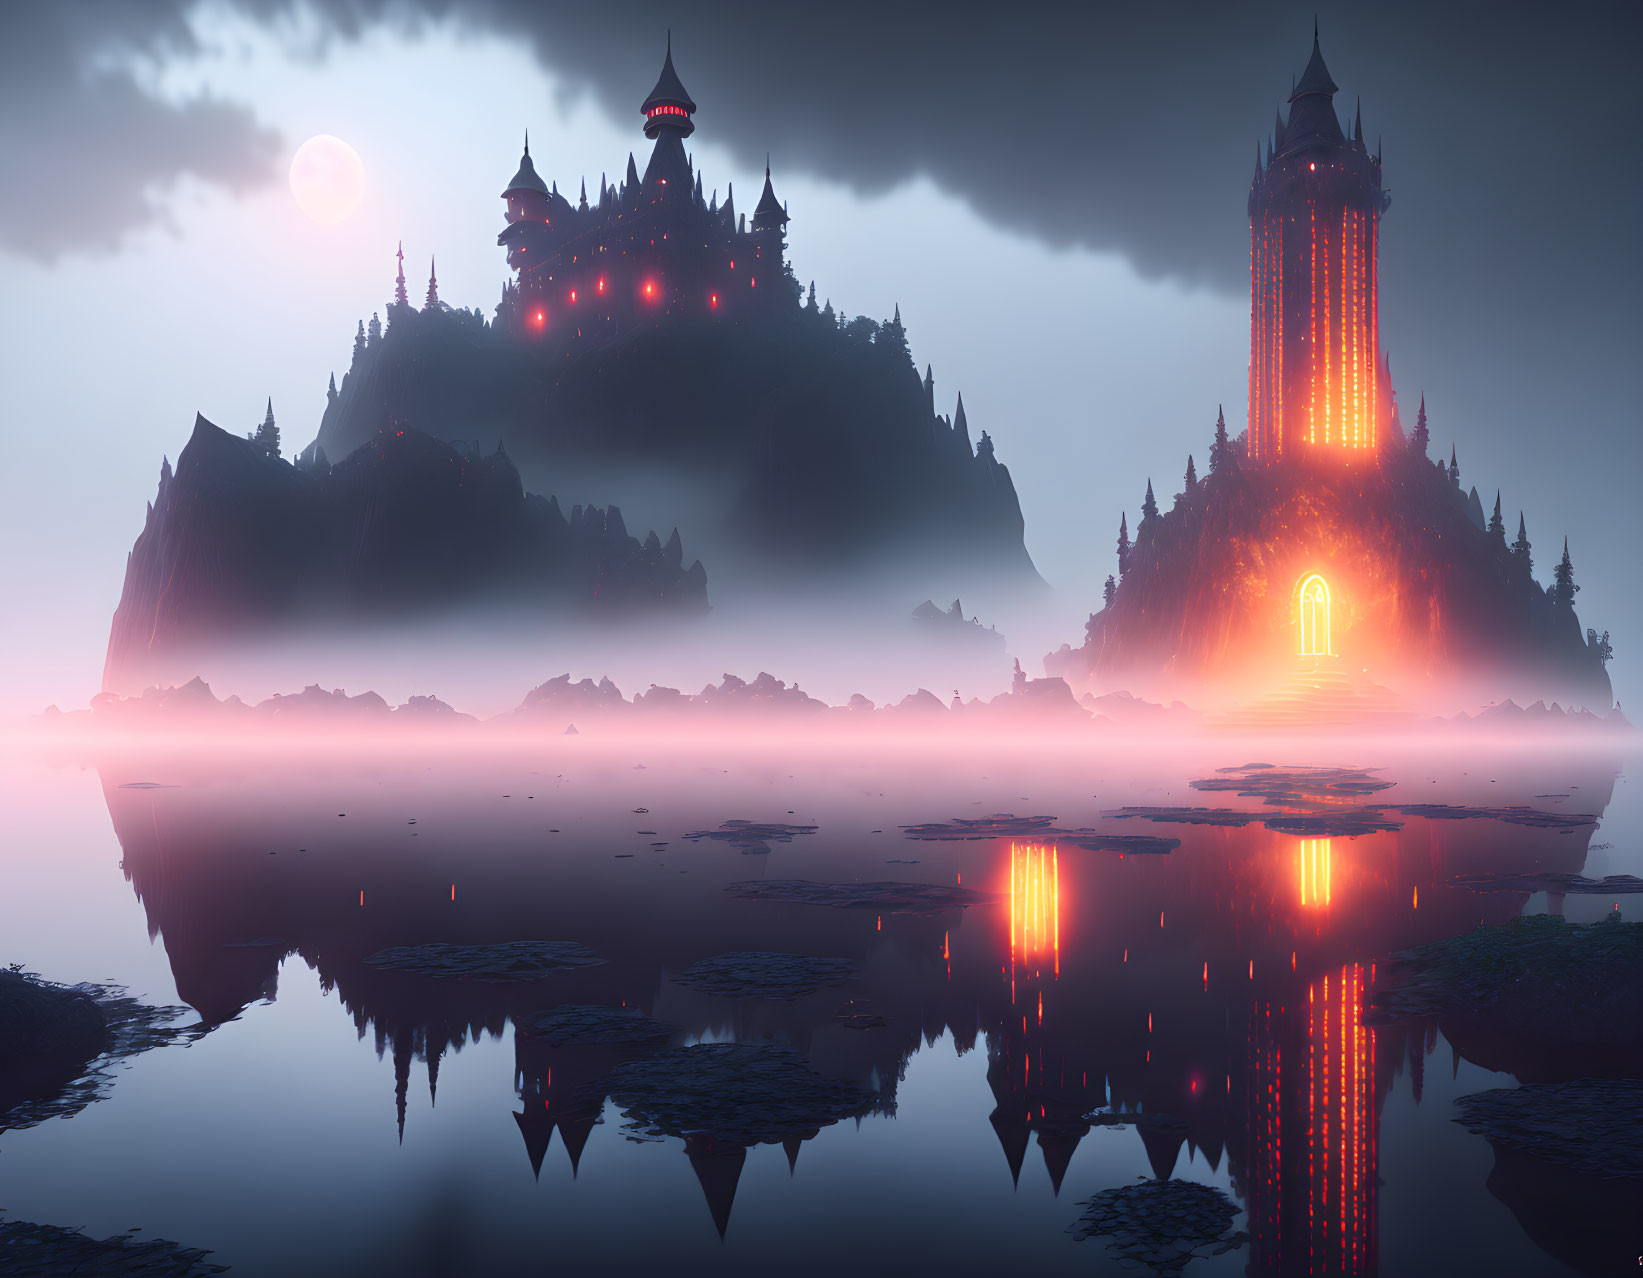 Mystical twilight scene with eerie castle on hill and glowing tower reflected in misty water under large